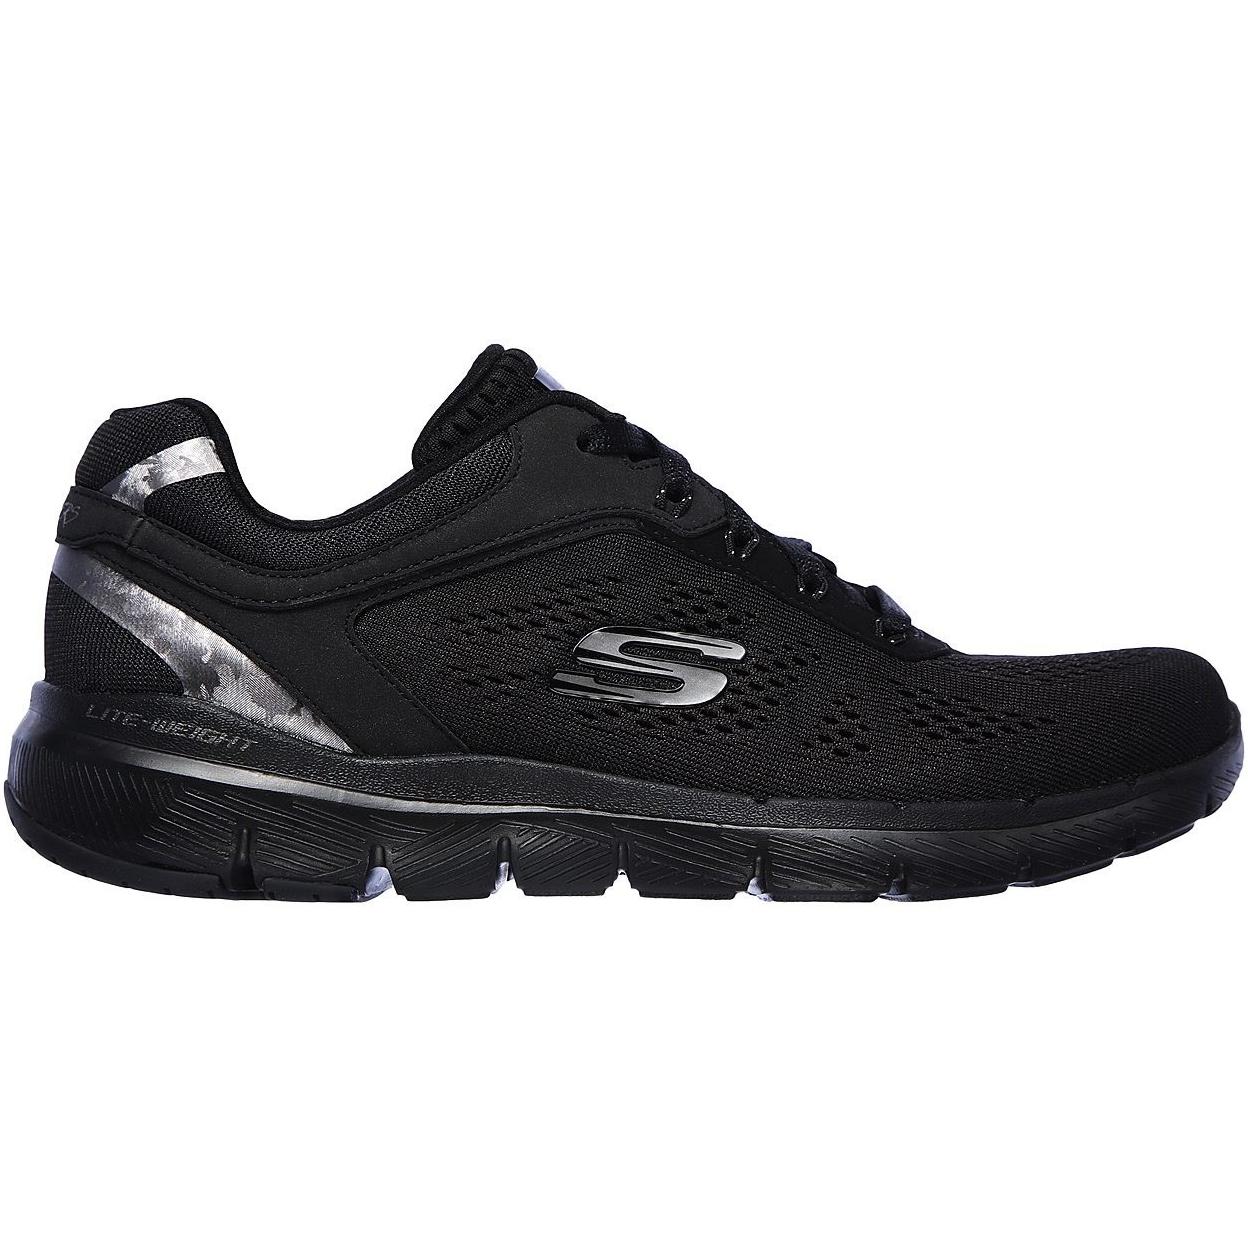 Skechers Flex Appeal 3.0 Lace Up Sports Trainers